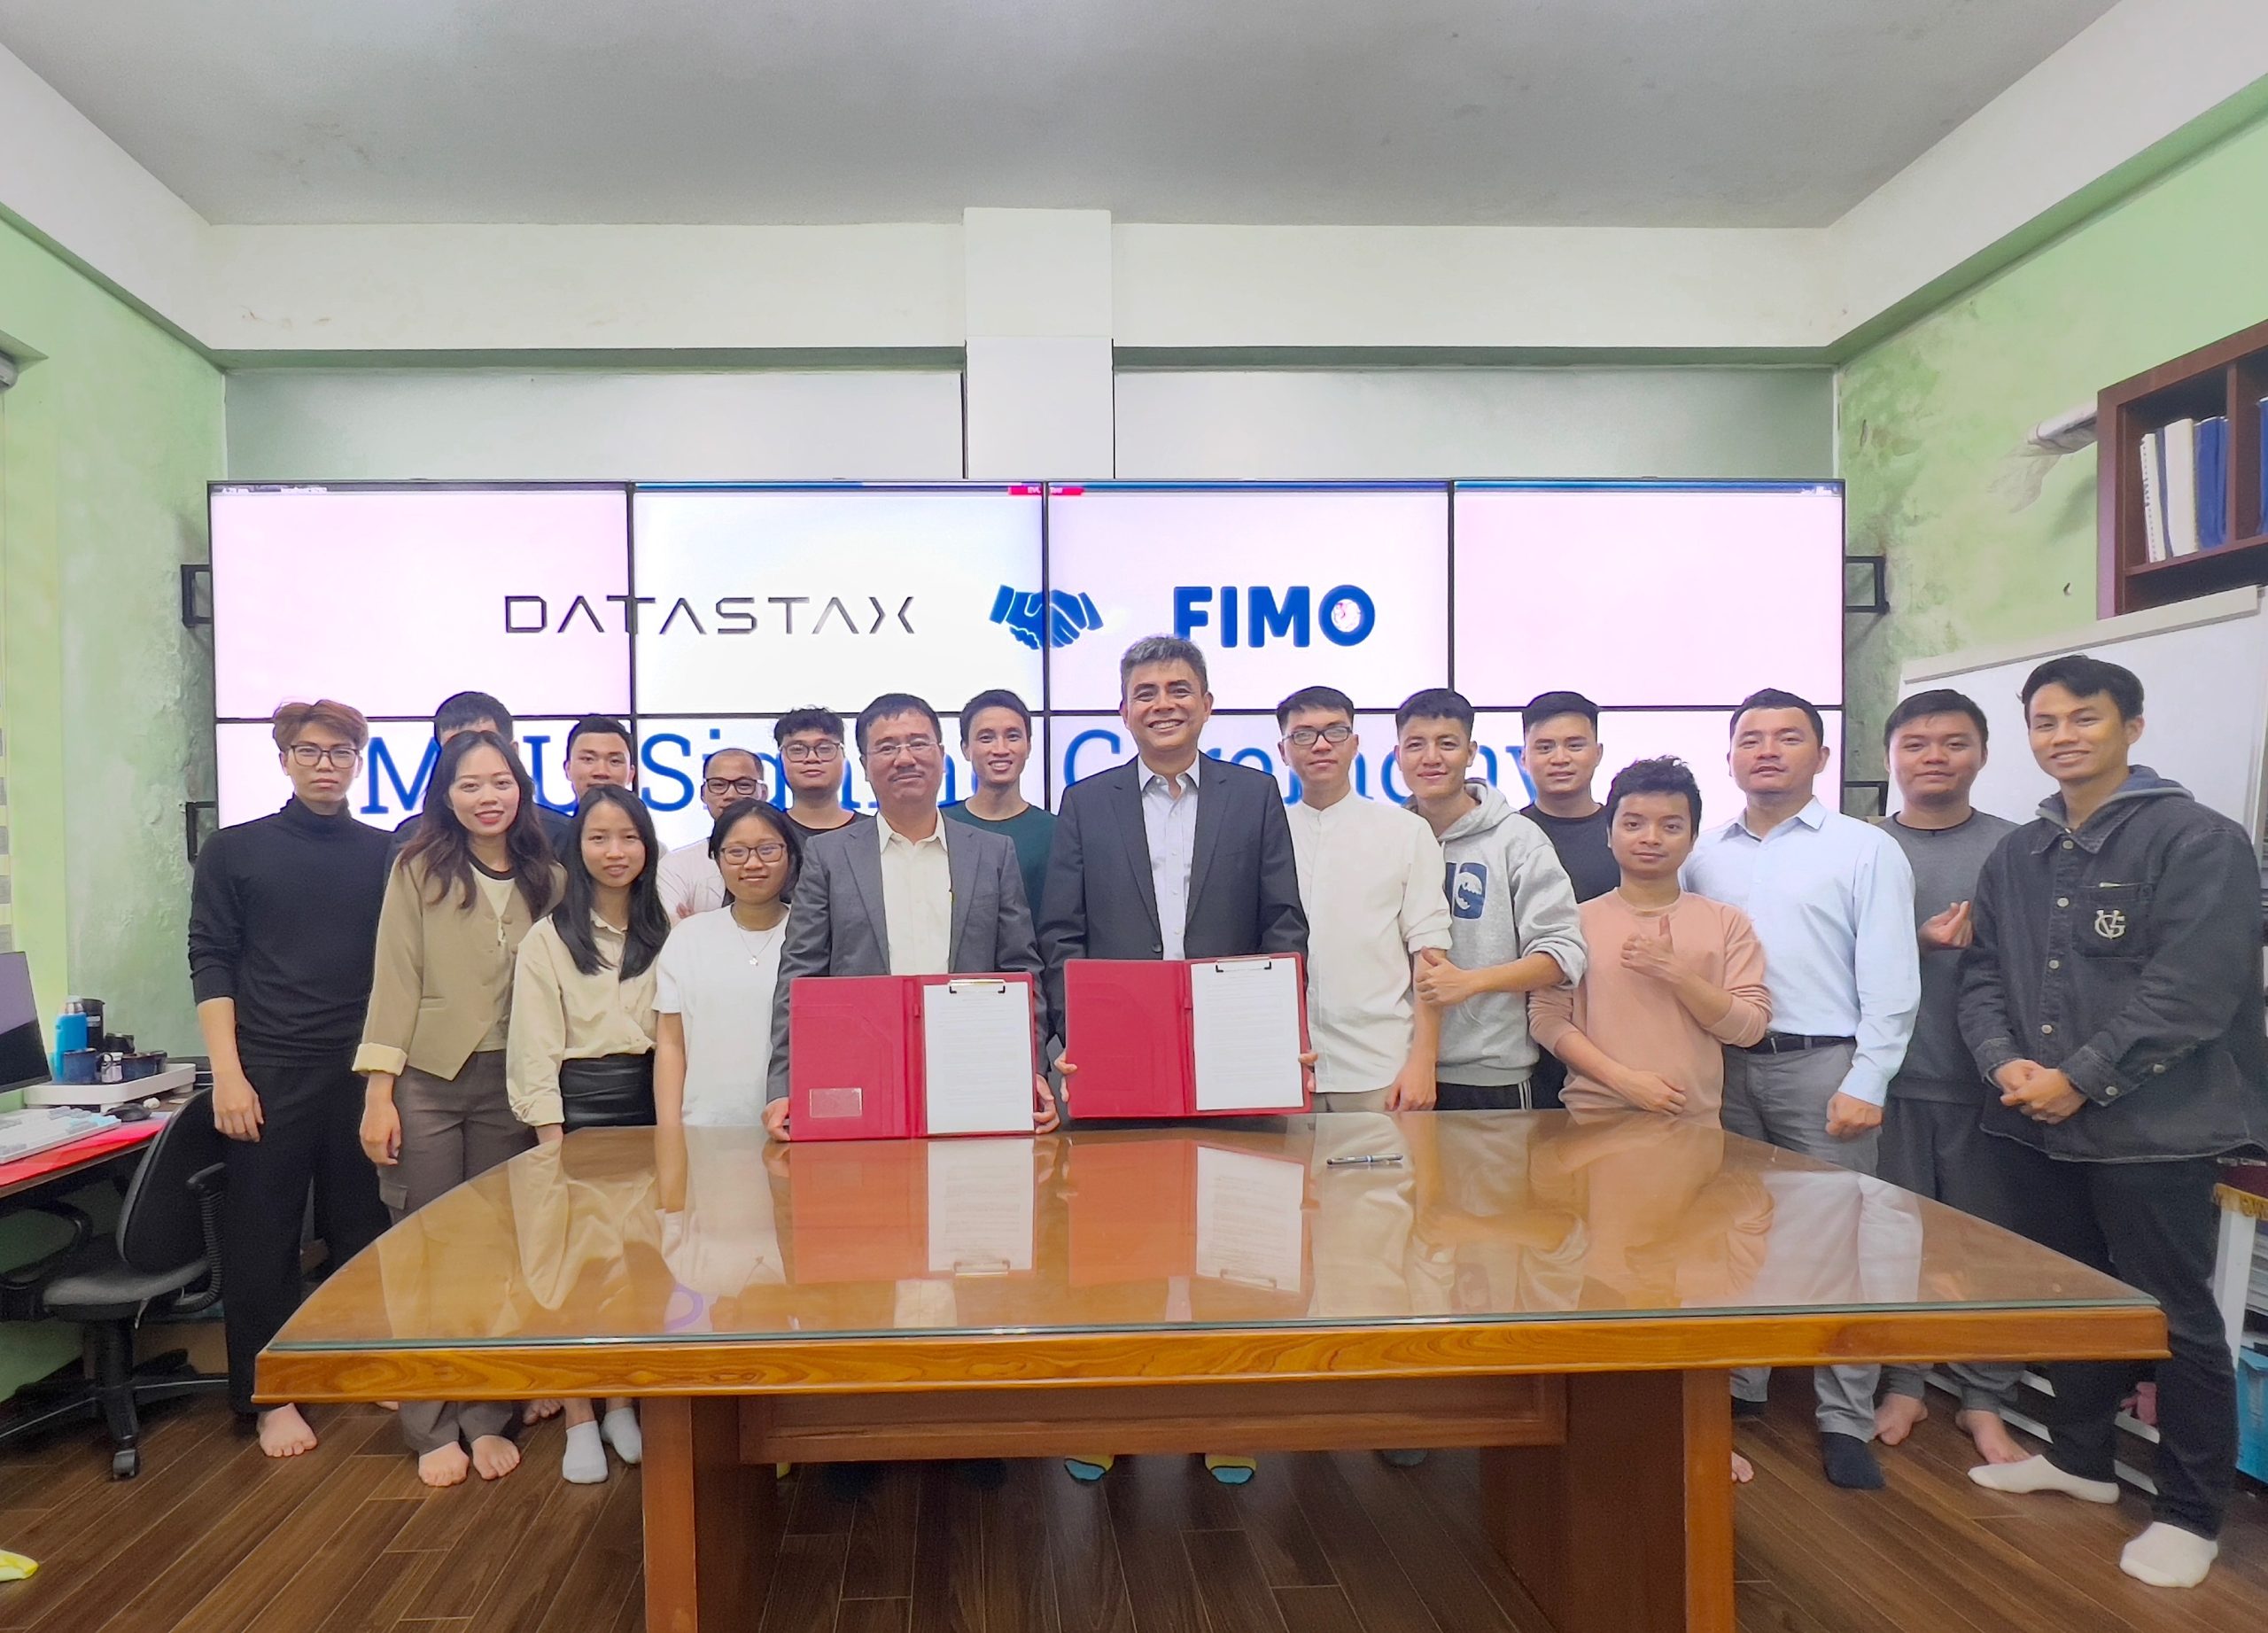 DataStax signs a memorandum of understanding (MoU) with FIMO, a research center in smart cities solutions